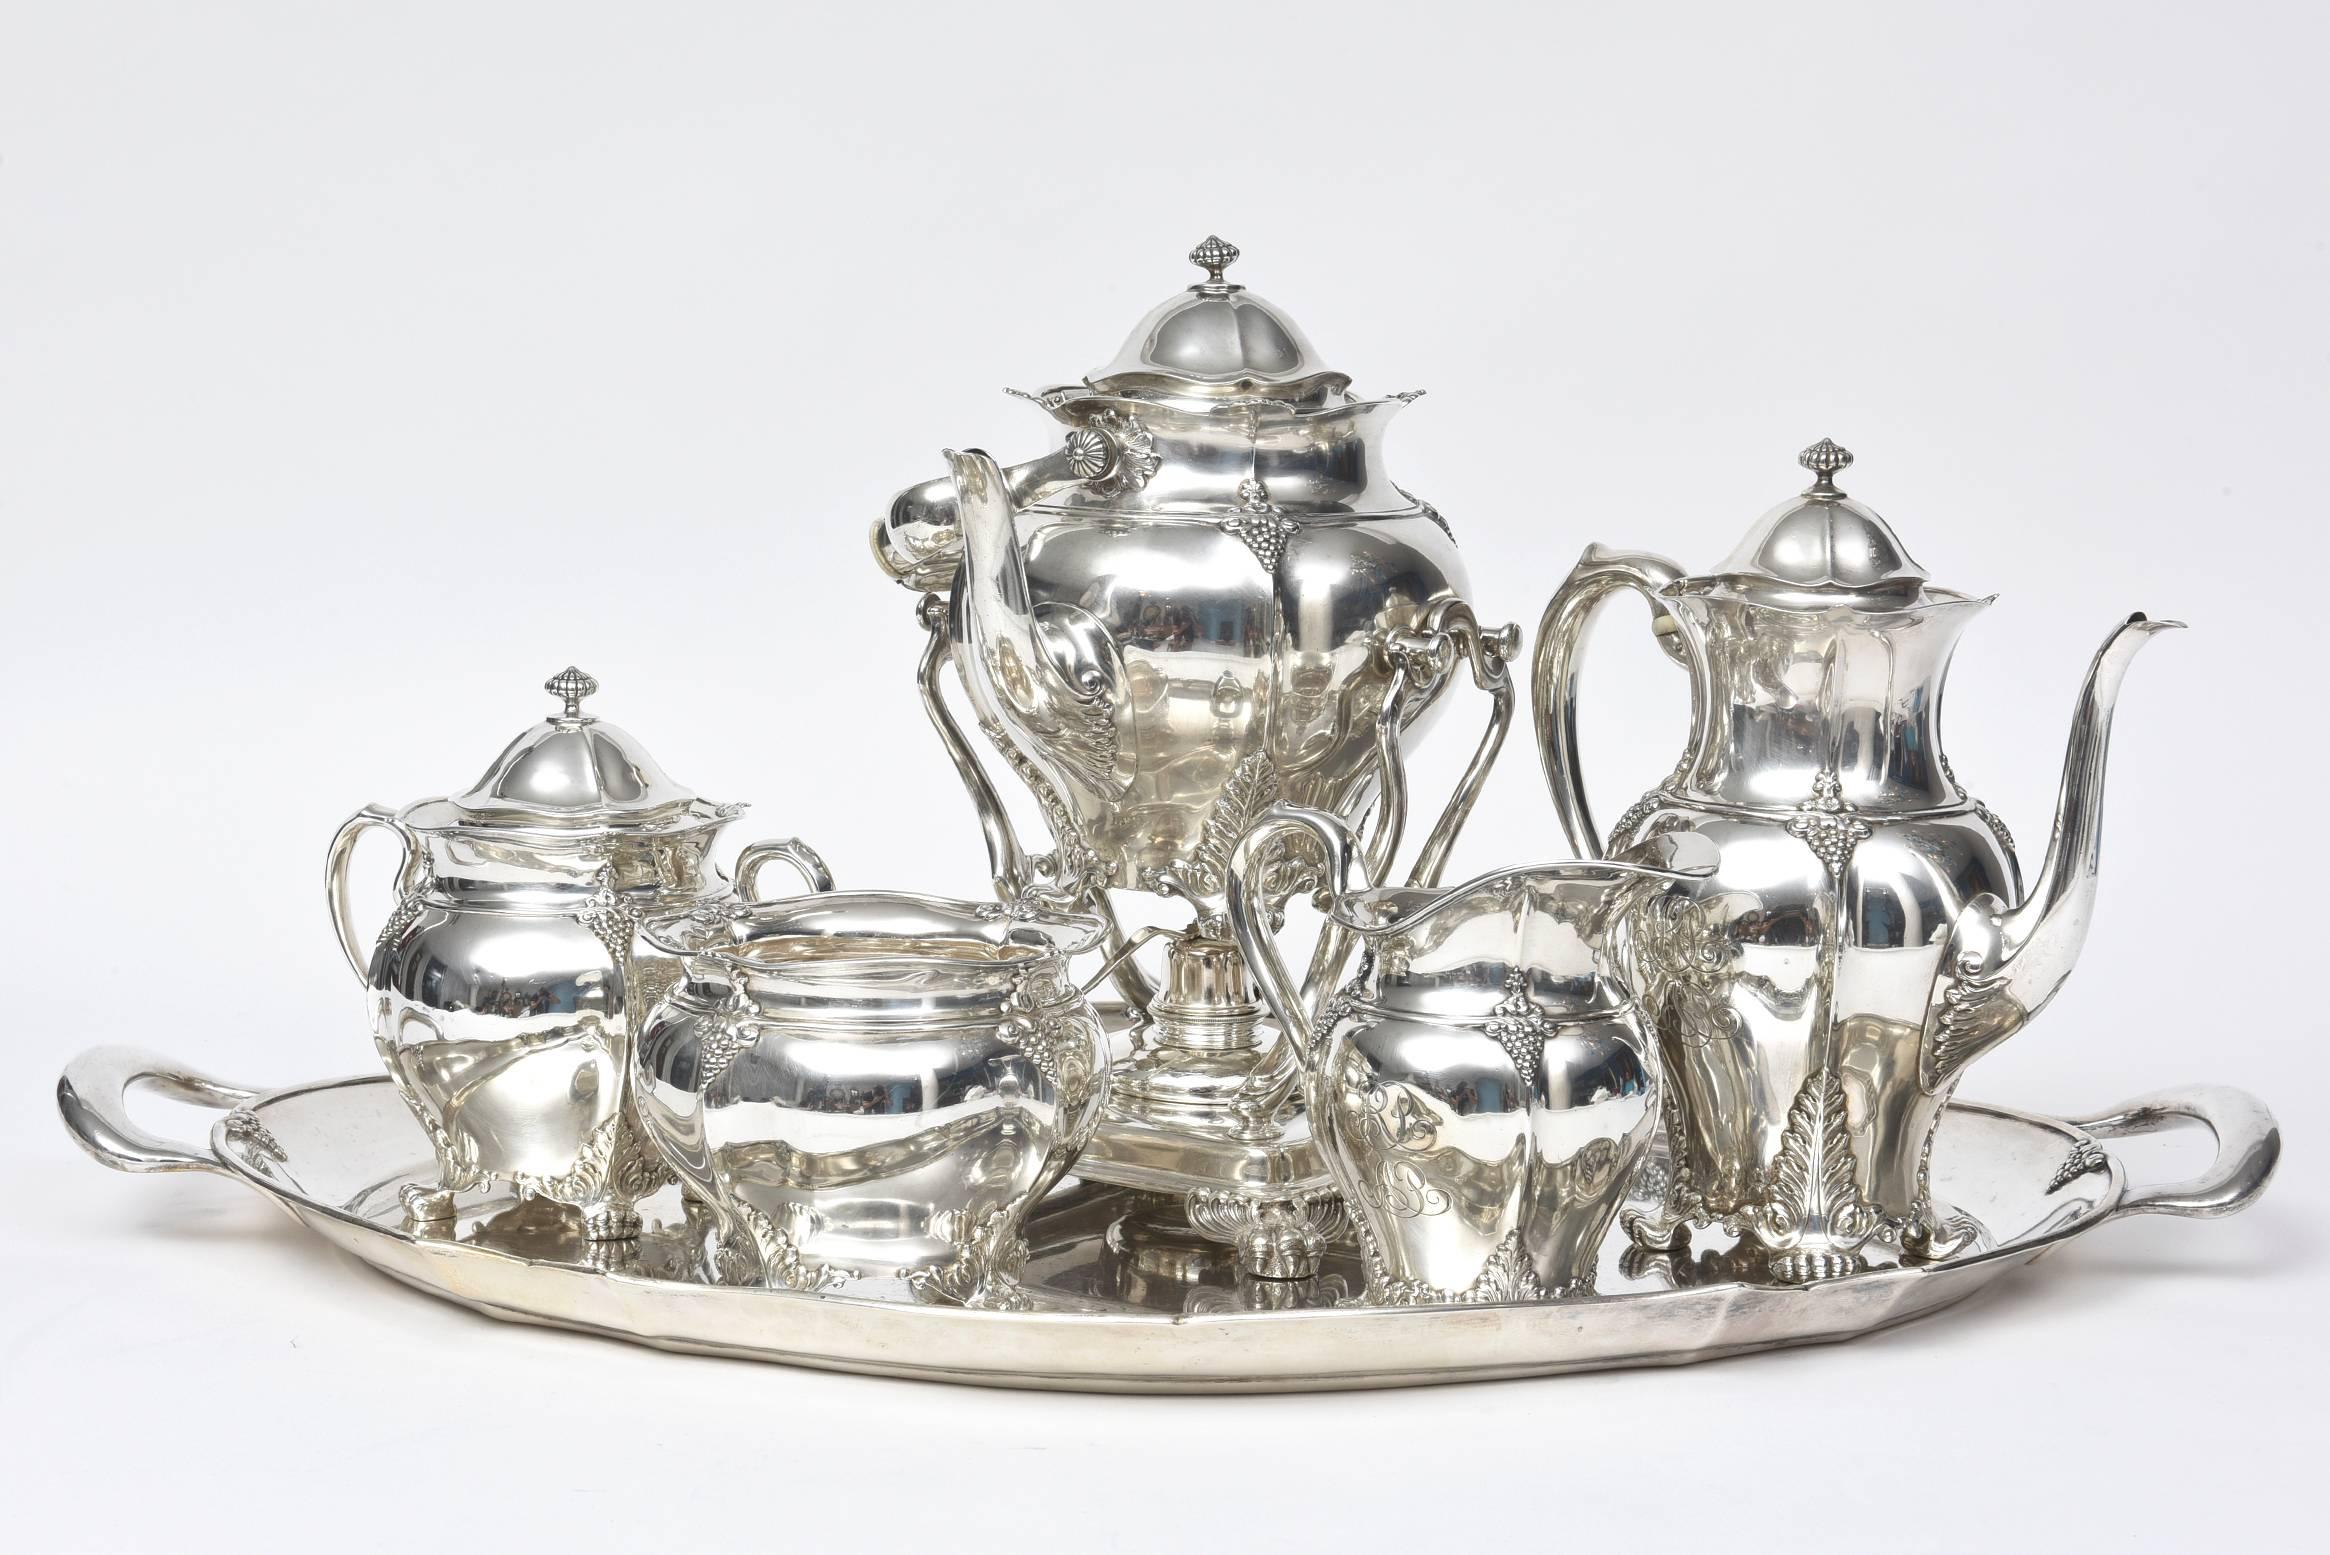 Victorian Tiffany & Co. sterling silver six-piece coffee and tea set. Pattern has applied grapes and vines, fluted edges, and claw feet. Marked: 